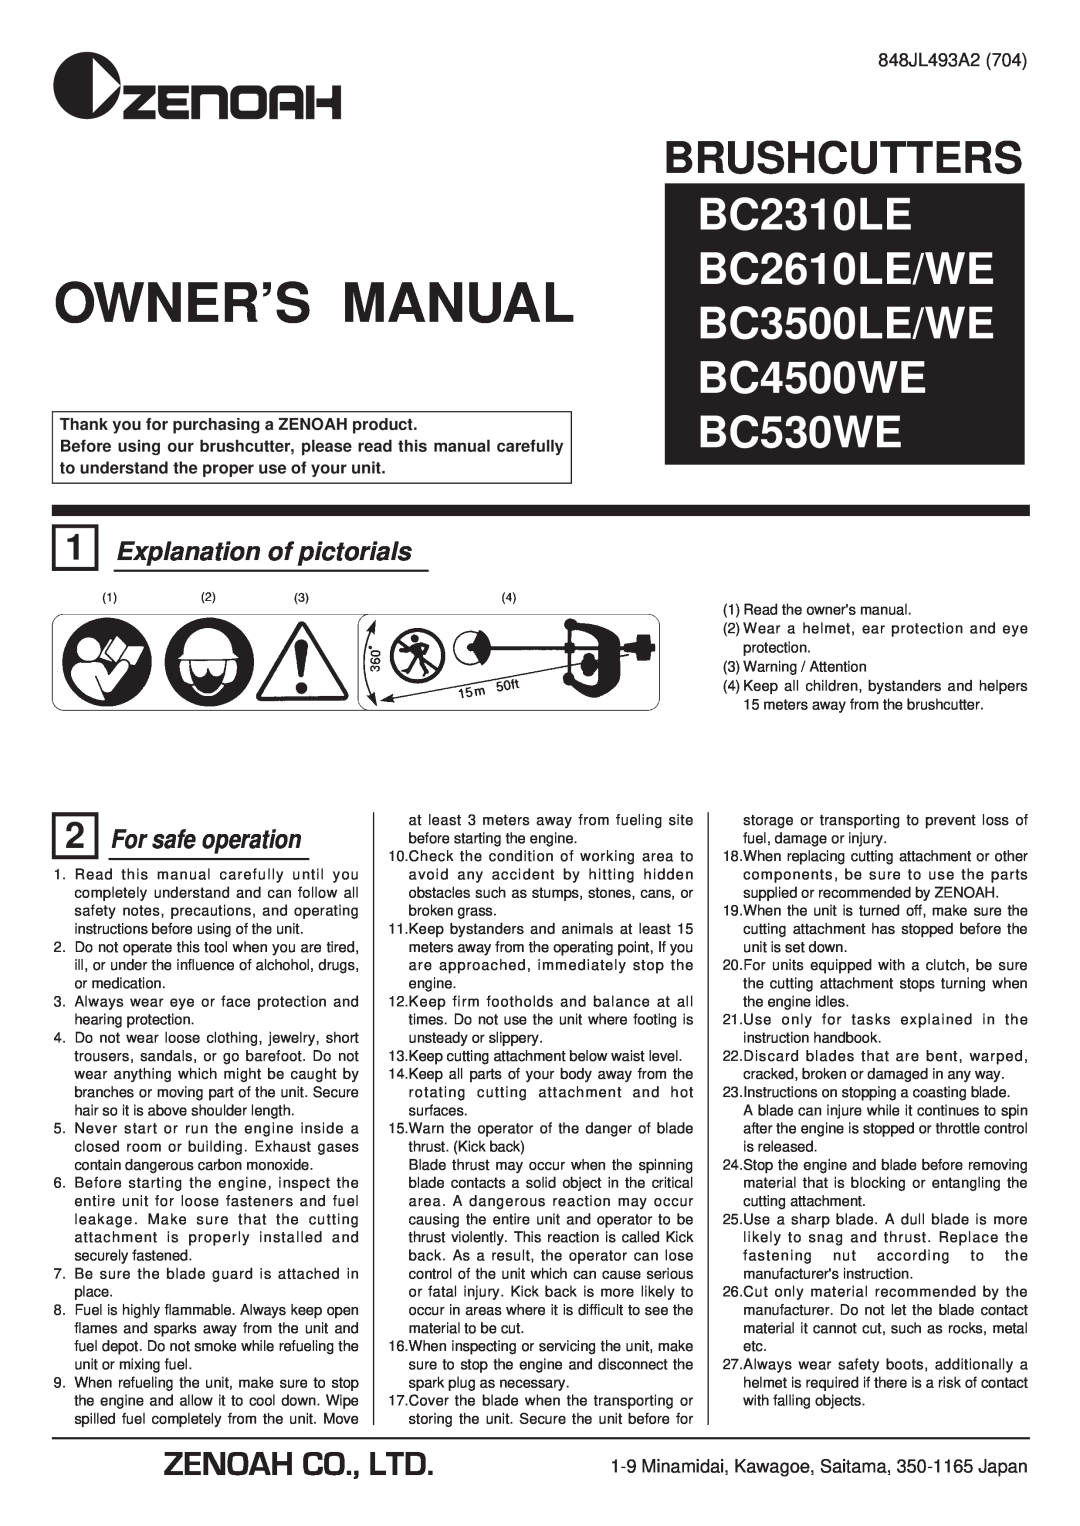 Zenoah BC3500WE, BC3500LE/WE, BC2300LE owner manual Explanation of pictorials, For safe operation, Brushcutters, 848JL493A2 